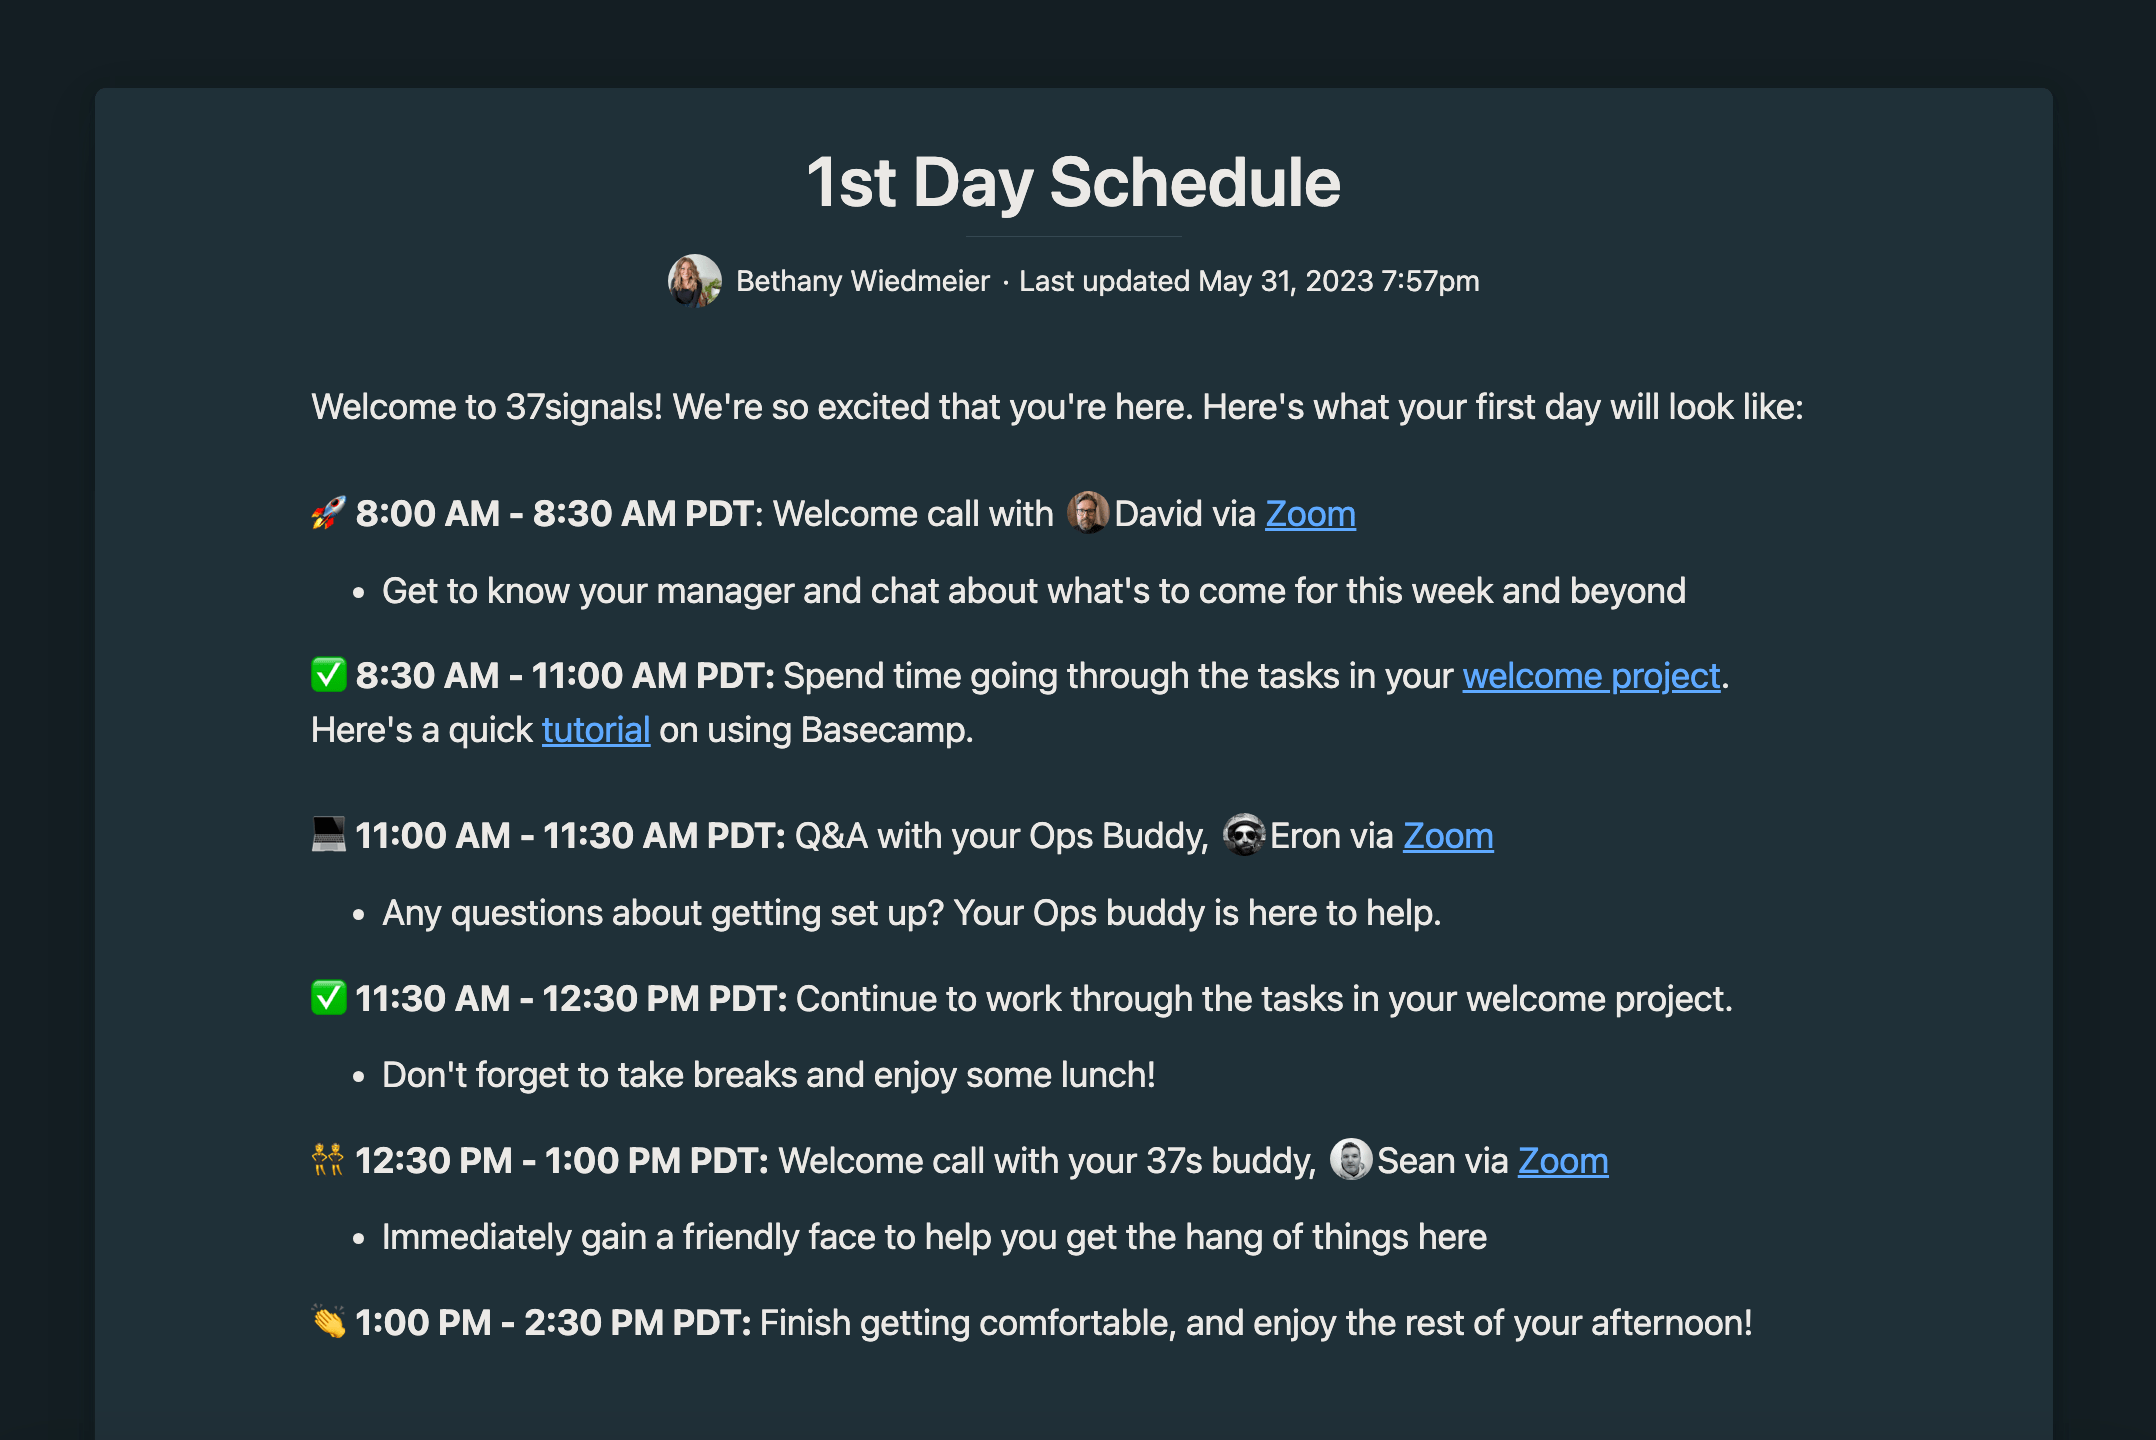 Day 1 onboarding schedule